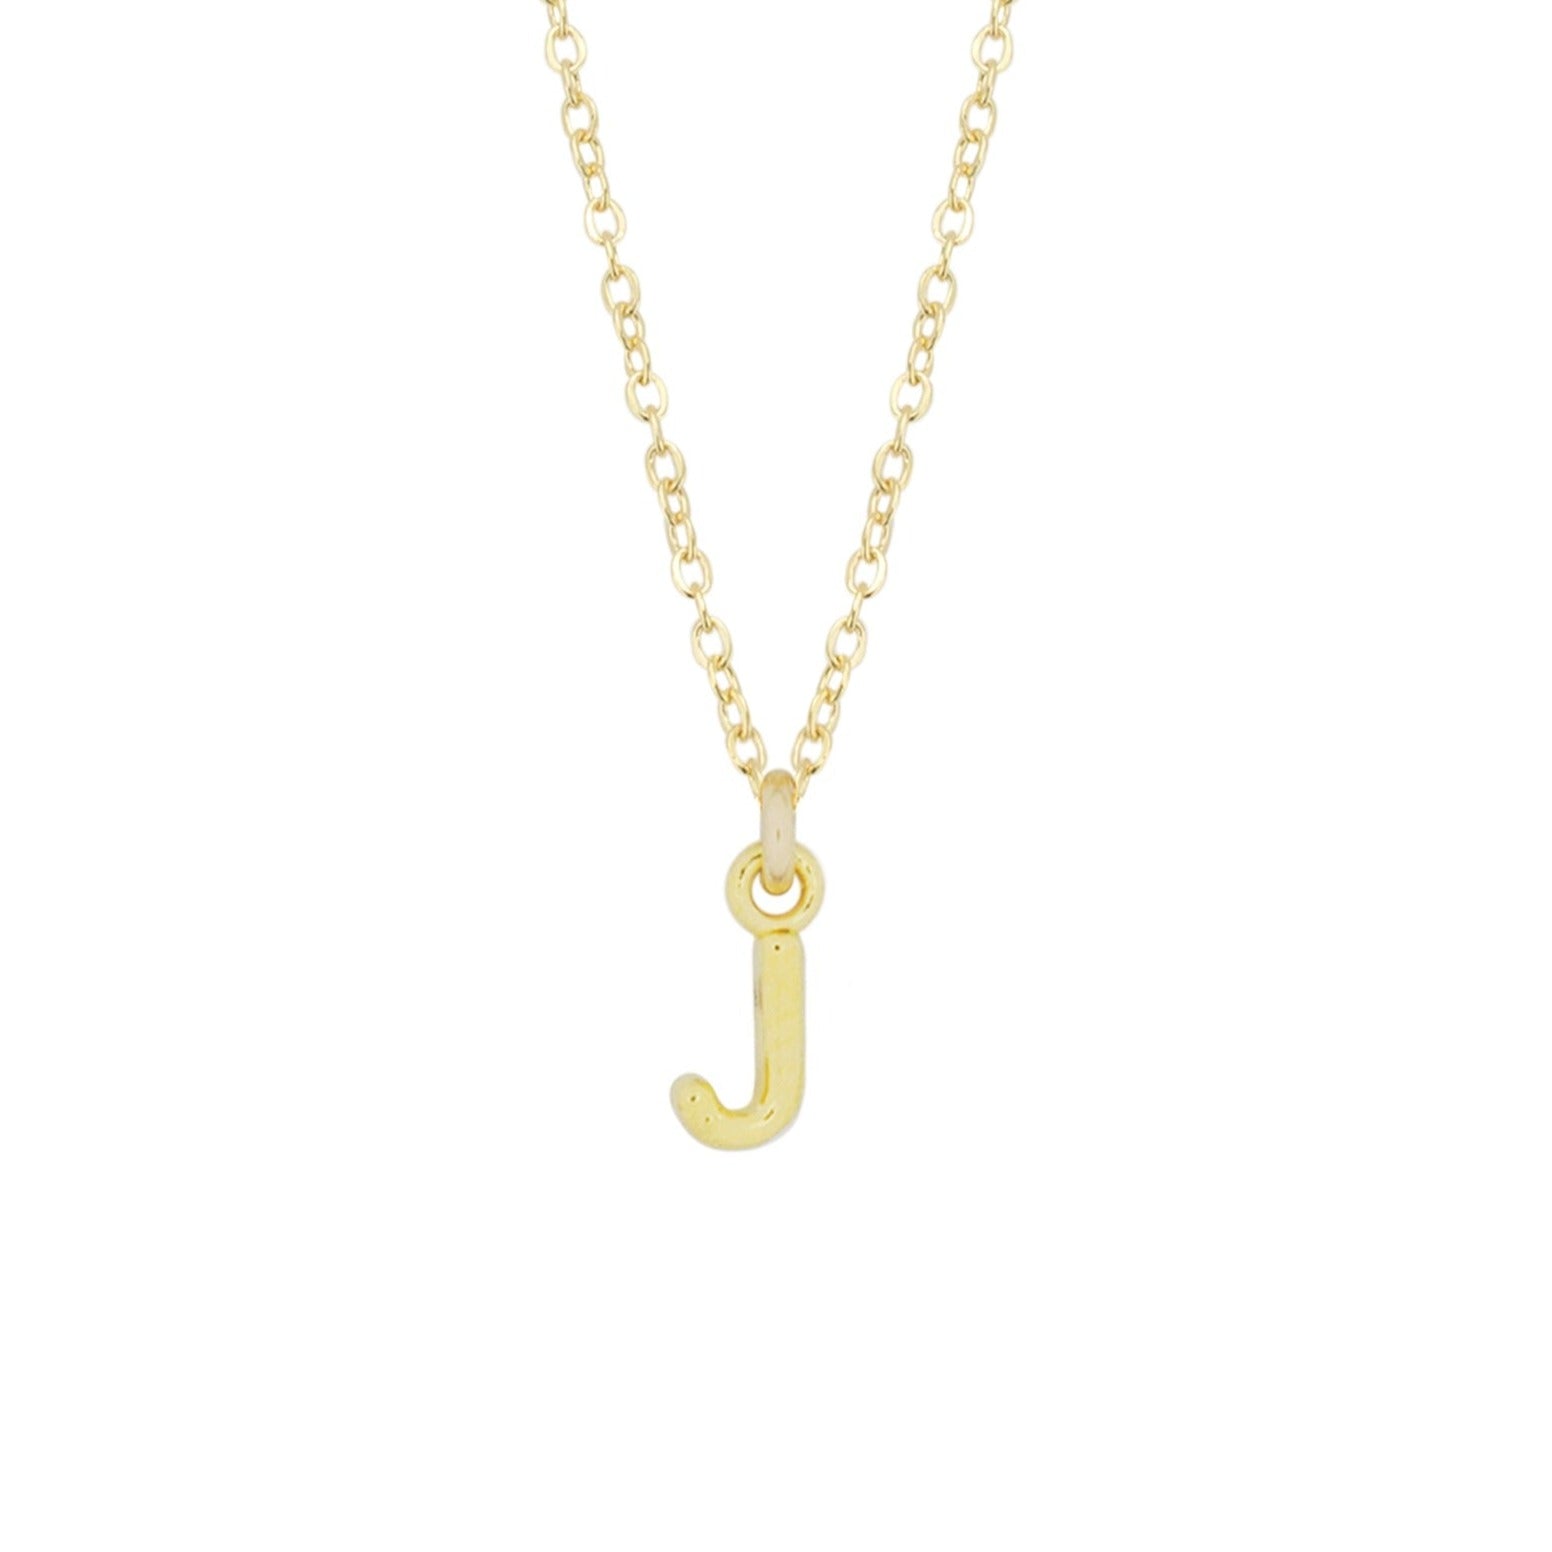 J Gold Initial Necklace by Katie Dean Jewelry, made in America, perfect for the dainty minimal jewelry lovers